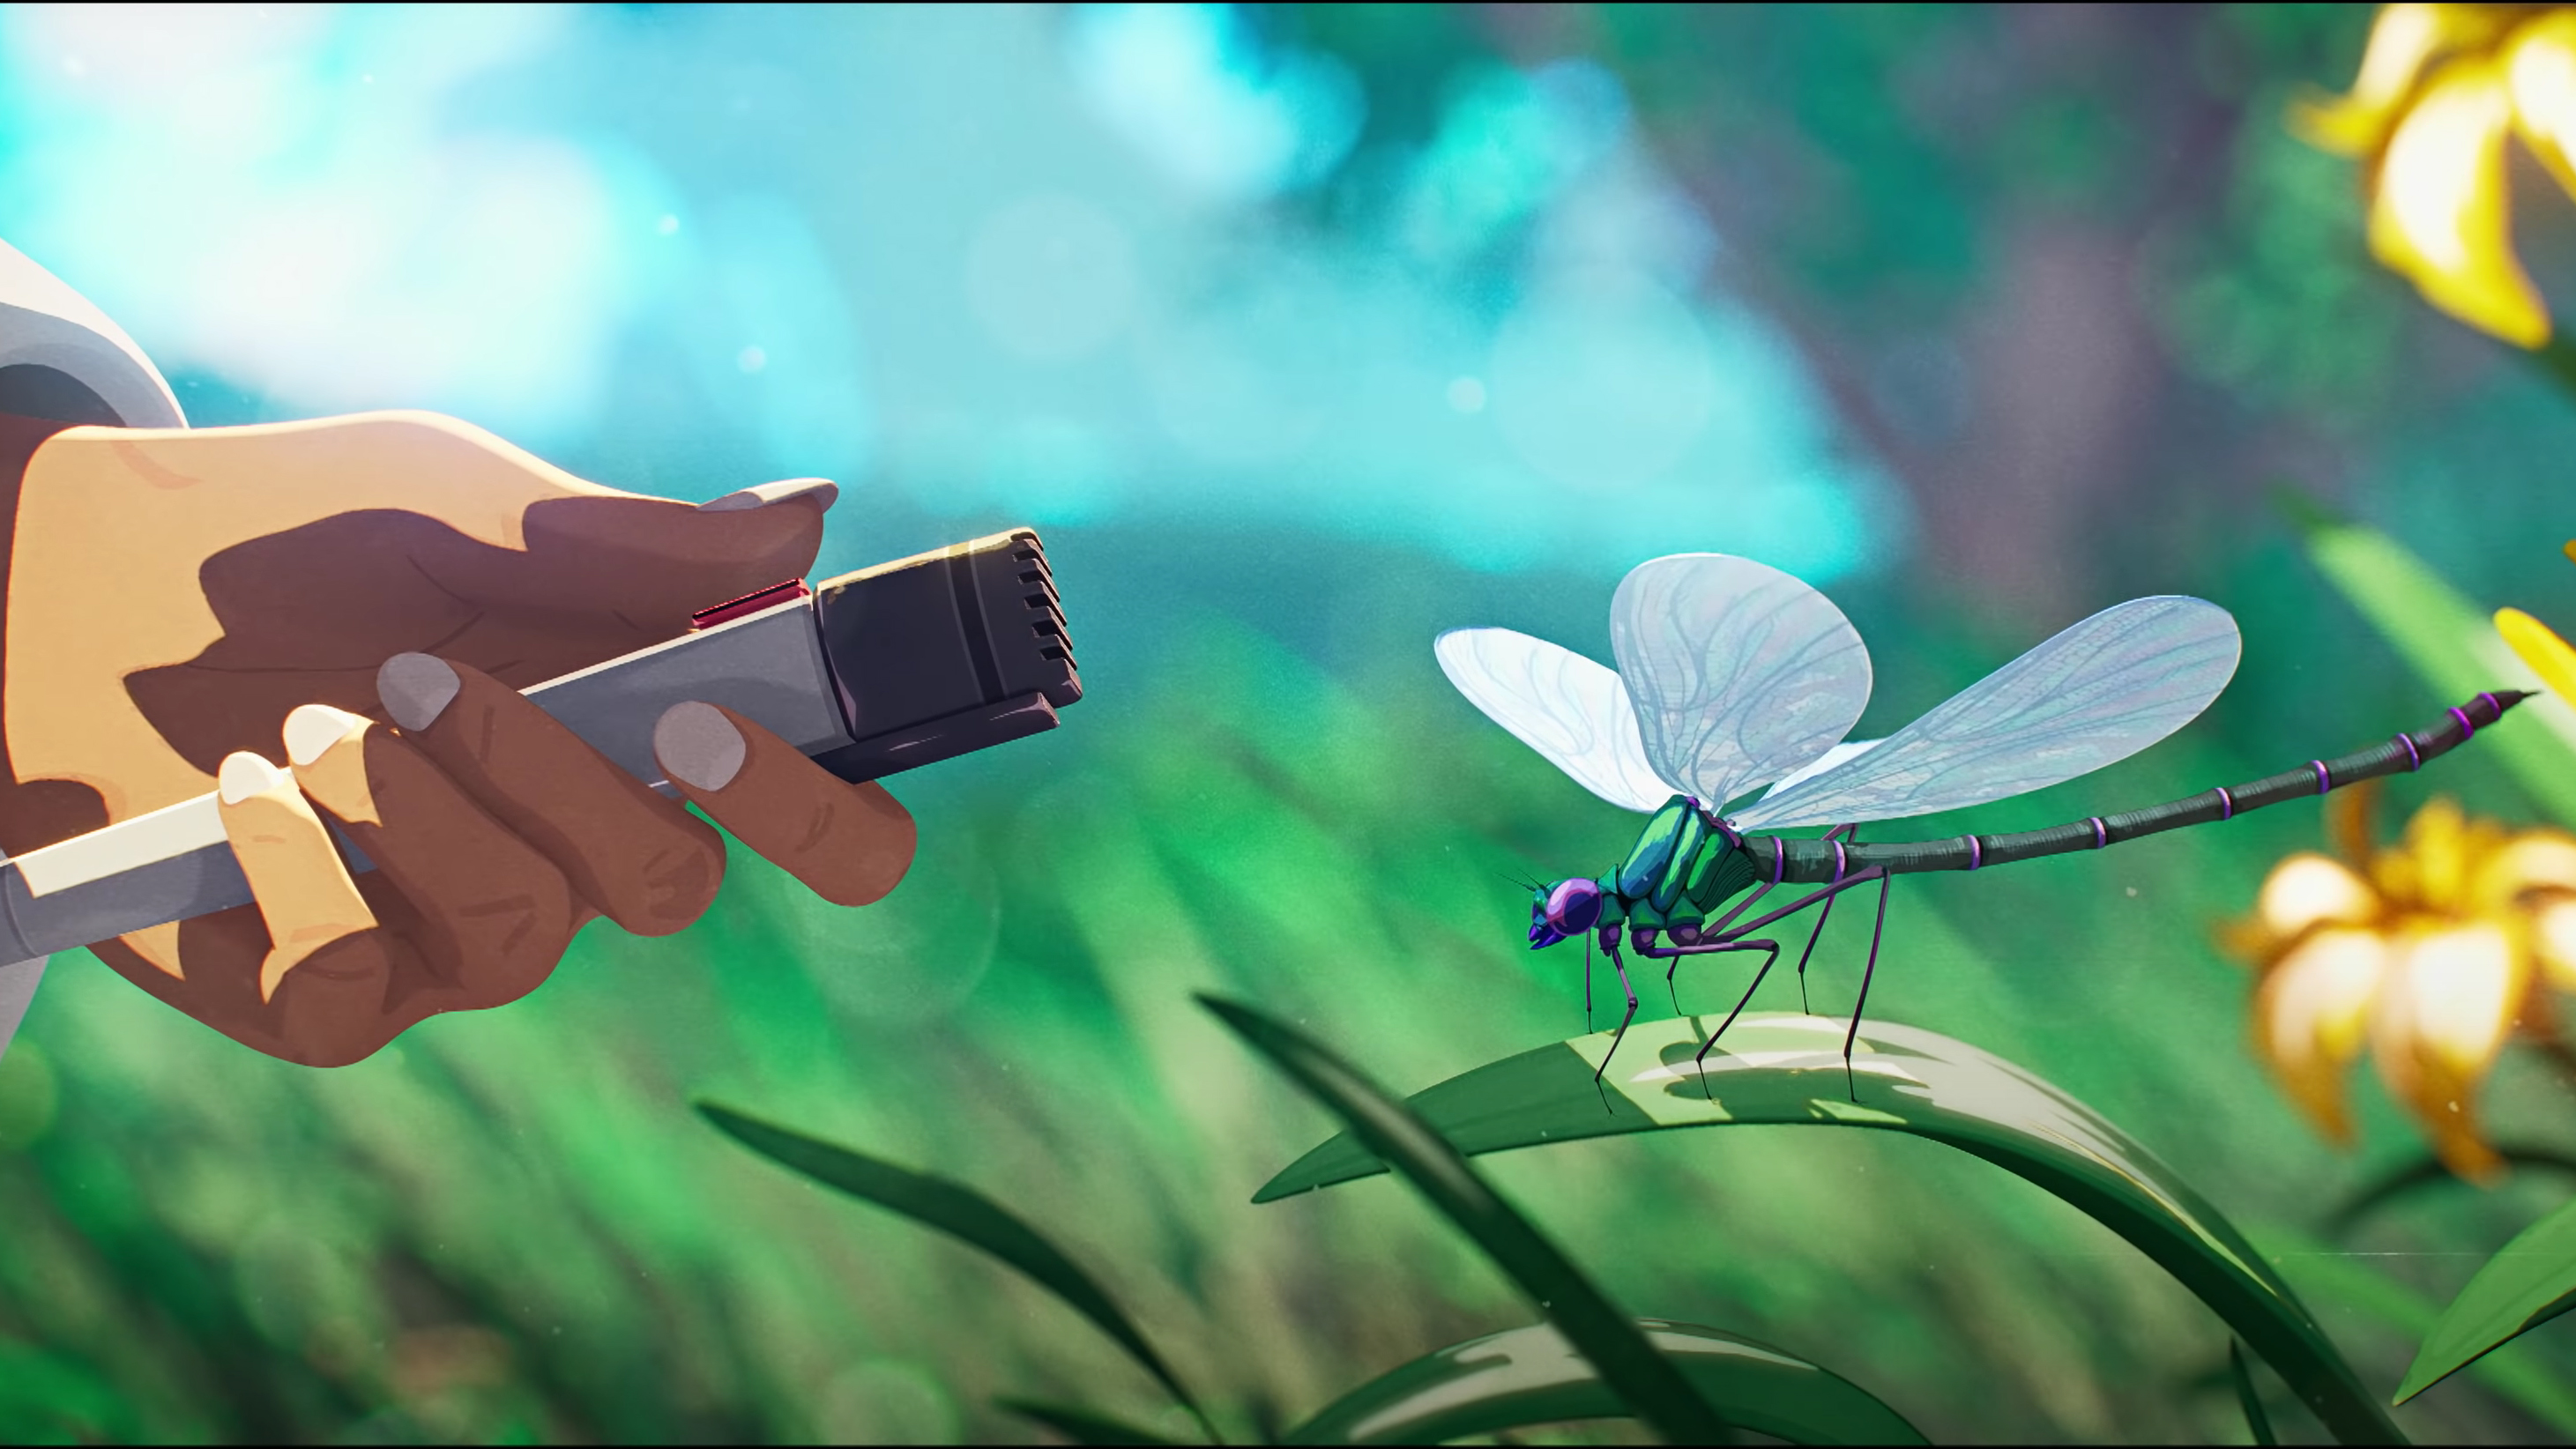 A microphone being held next to a dragonfly